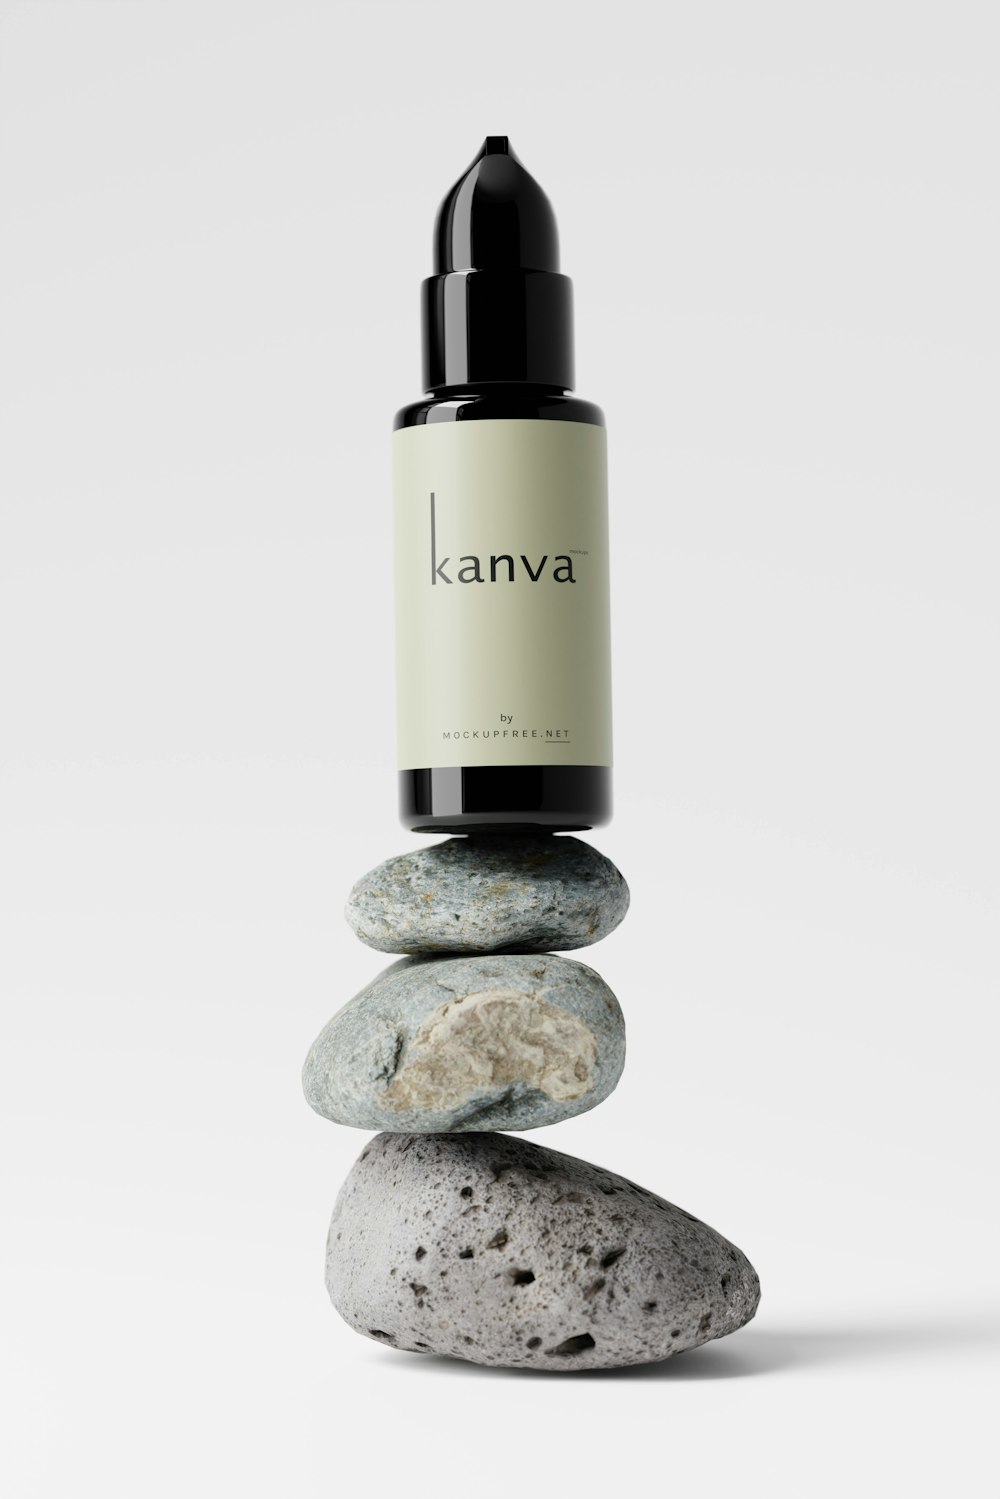 a bottle of kannava sitting on top of a pile of rocks